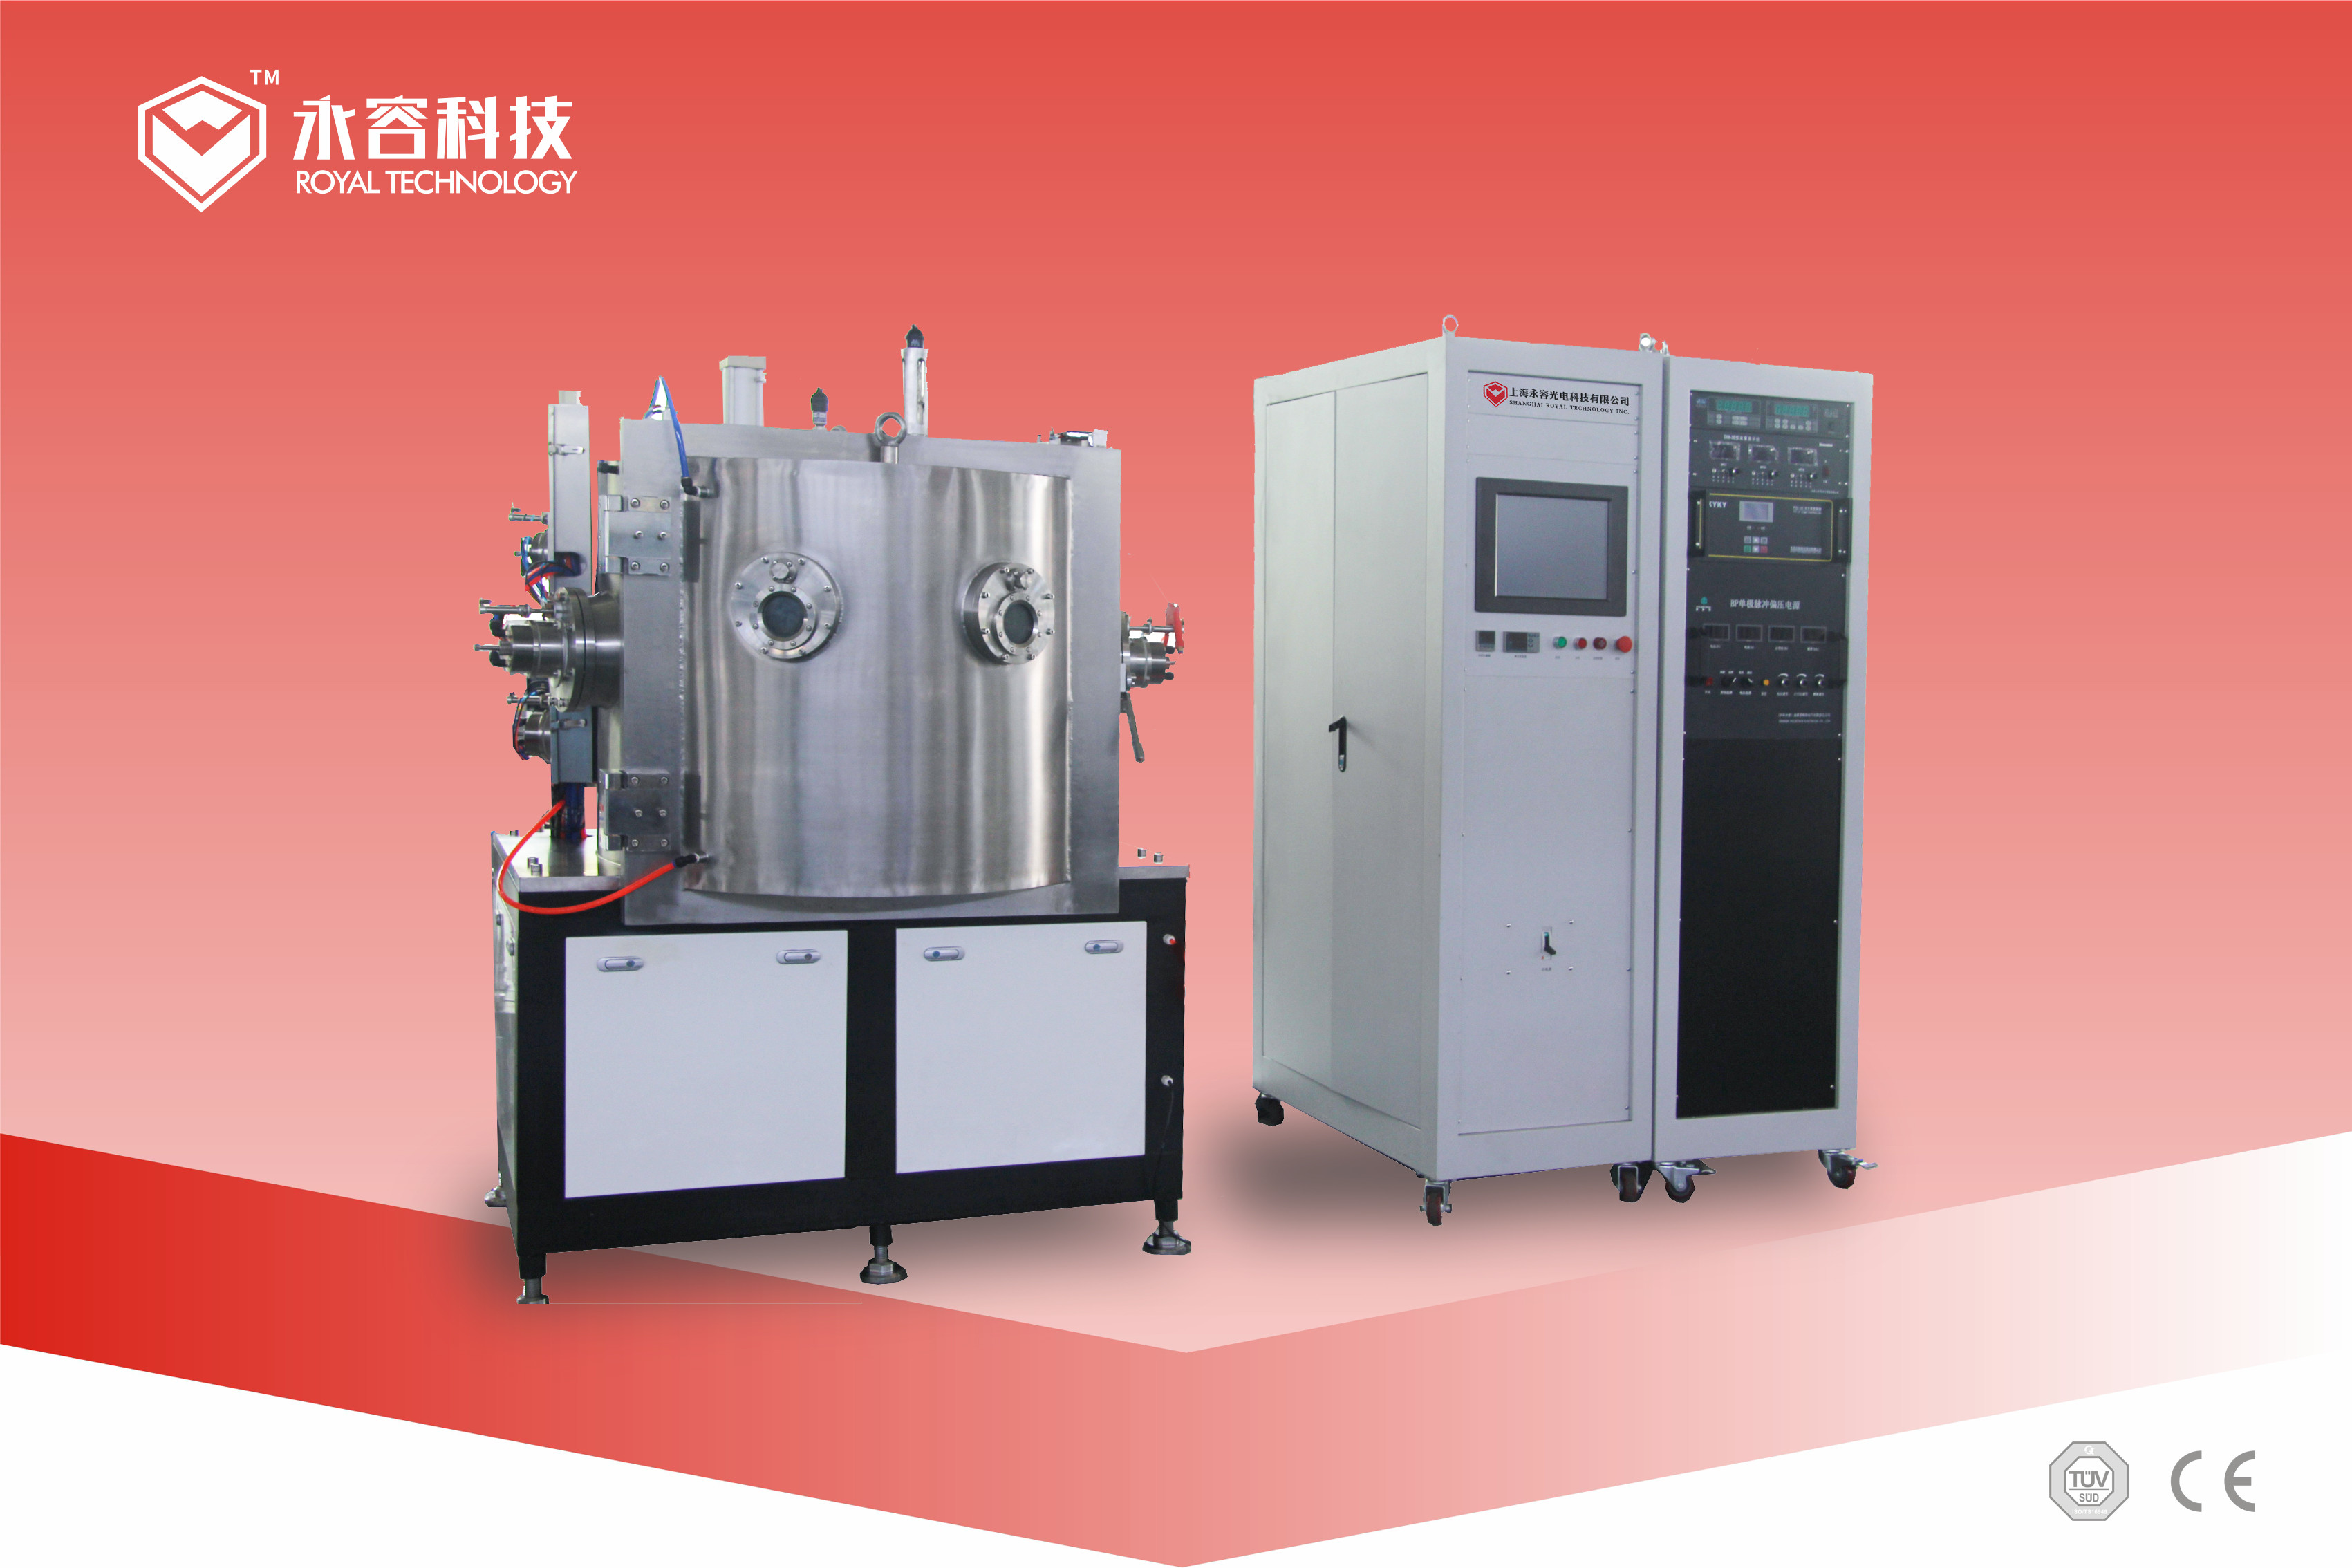 Jewerly Gold Plating Machine, DC Gold Sputtering Coating Plant